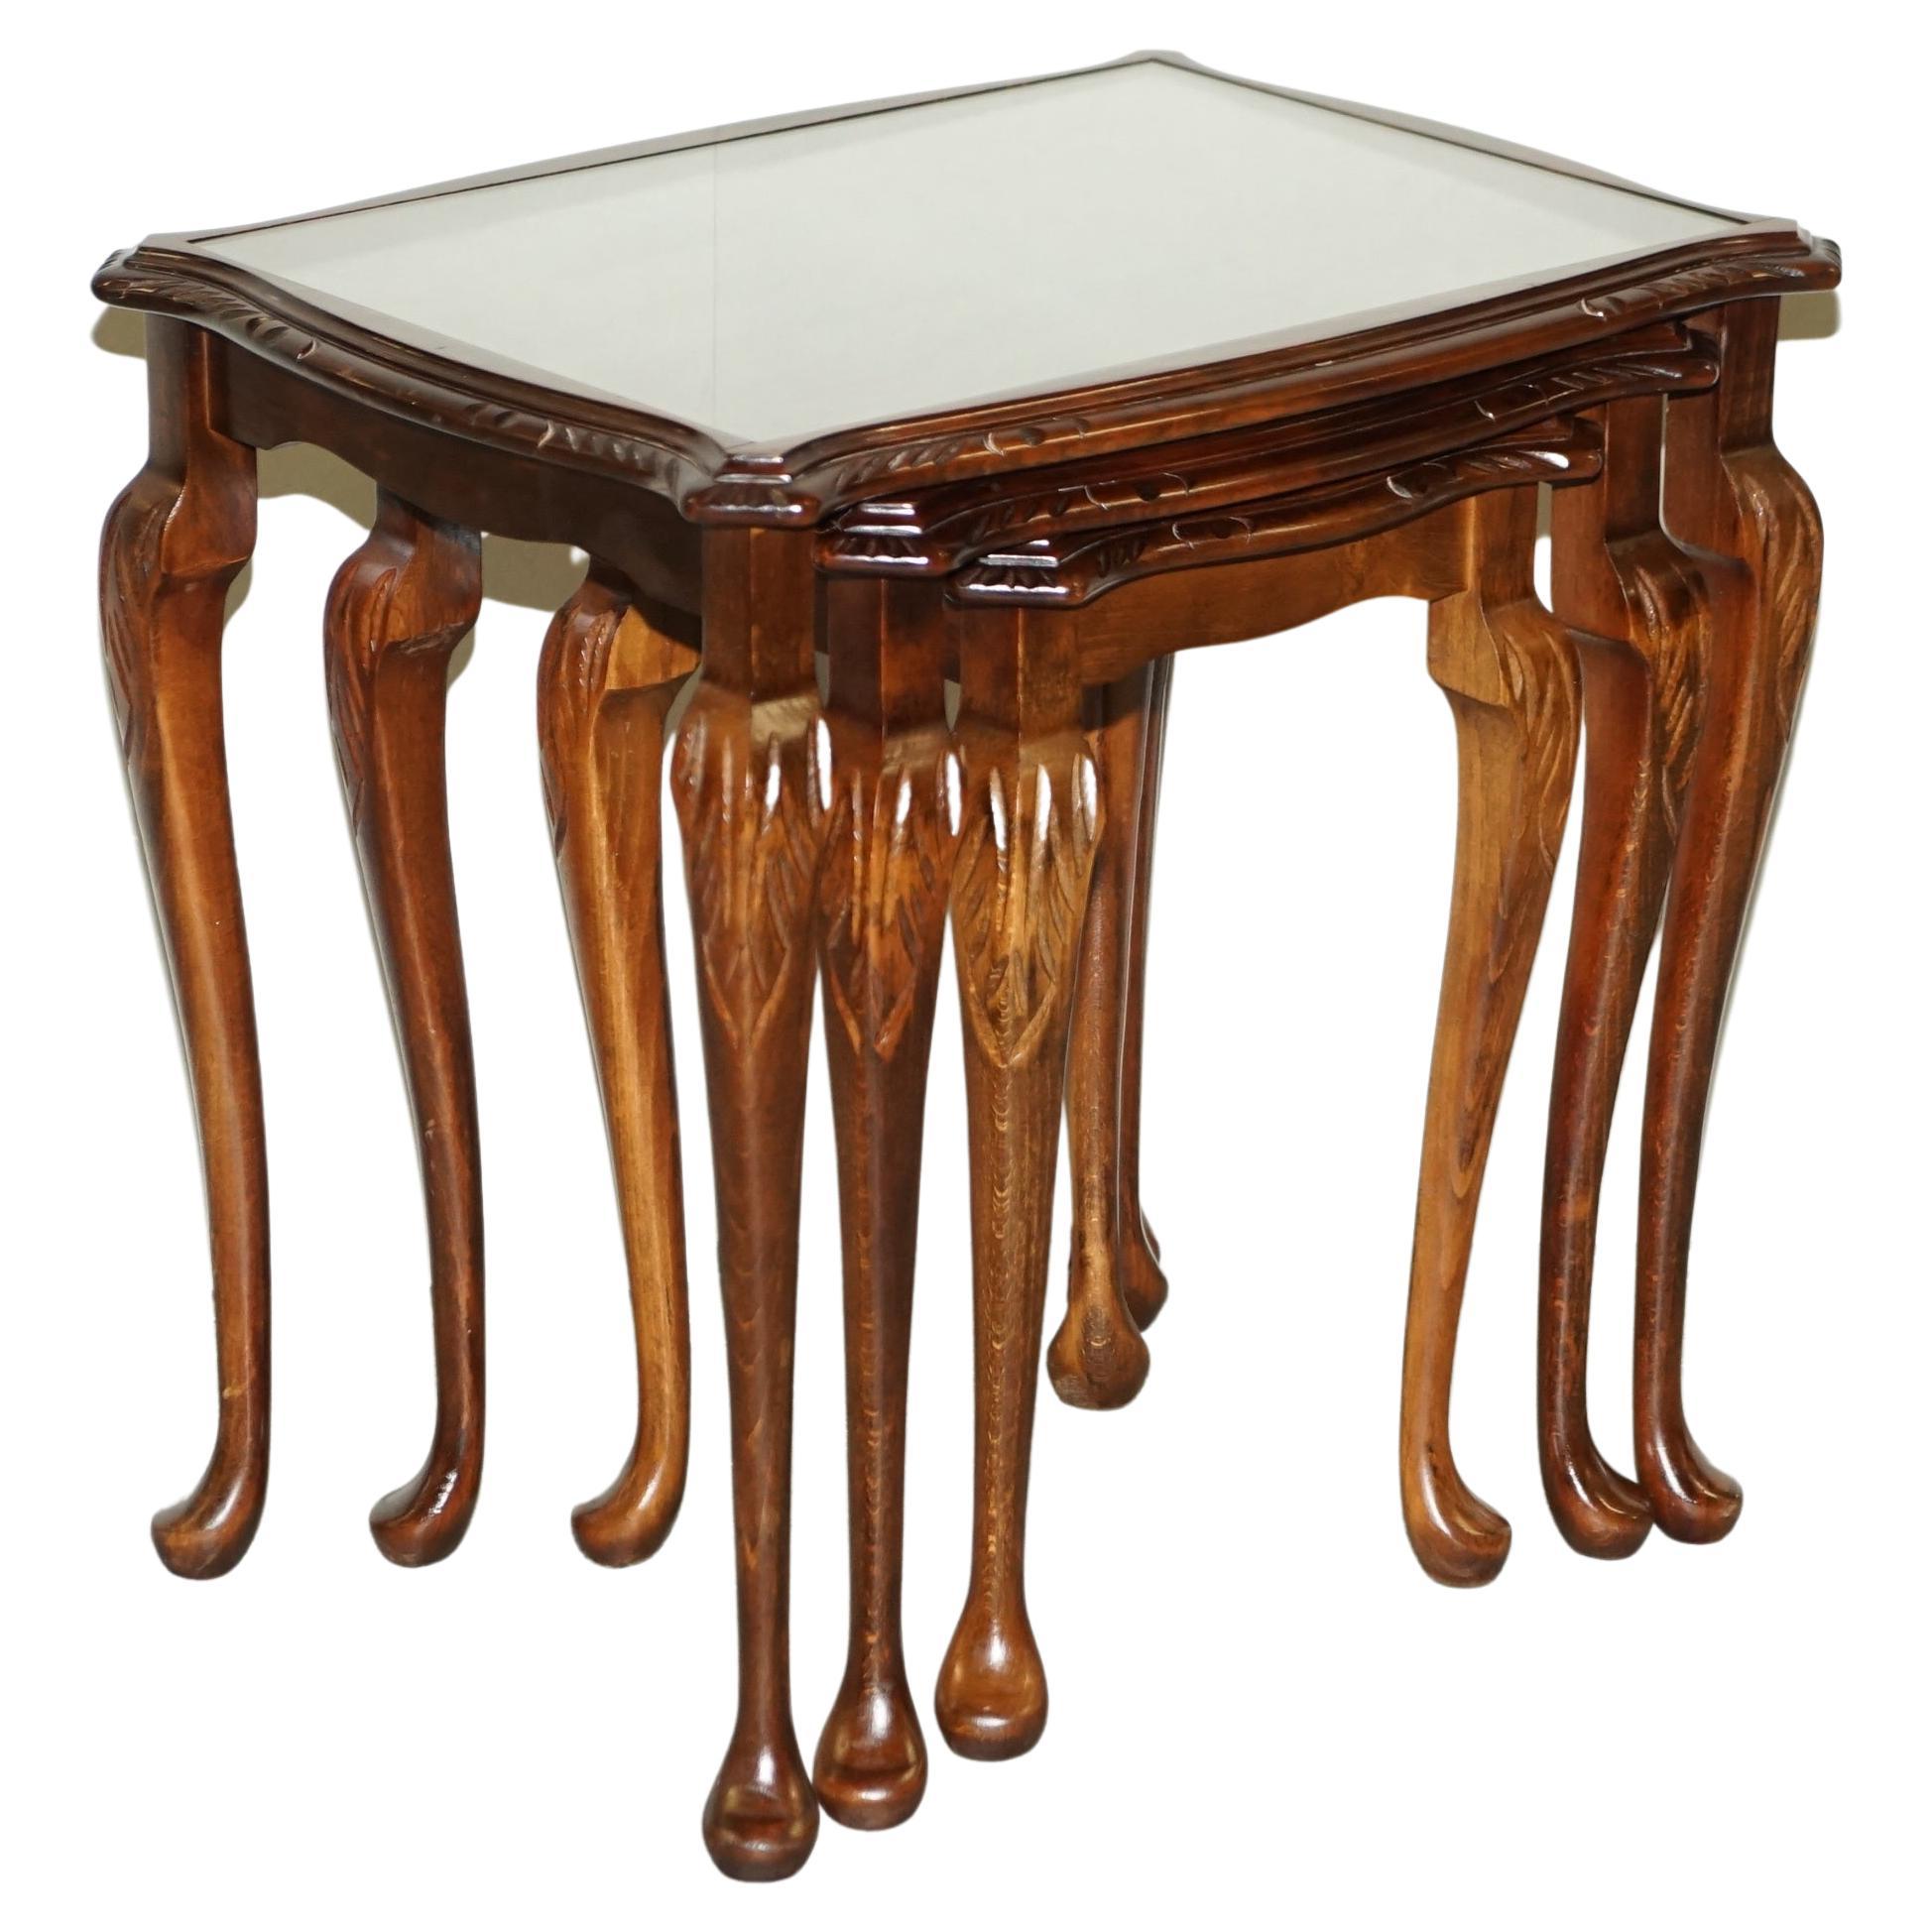 Vintage Nest of 3 Stacking Tables Solid Hardwood, Glass Tops & Carved Legs